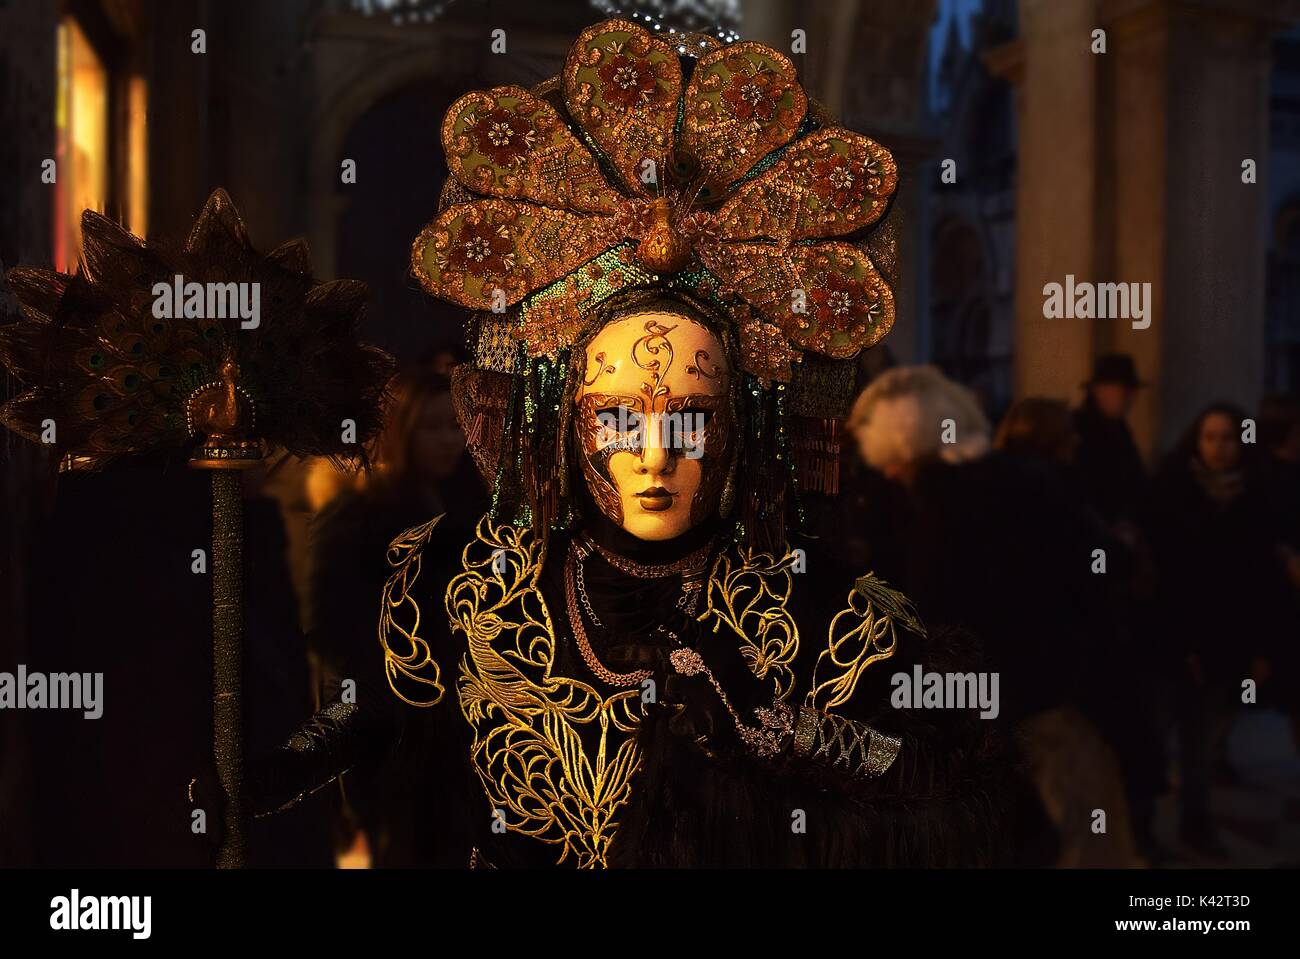 A person dressed in a costume resembling a peacock at a masquerade during the carnival of Venice. Stock Photo